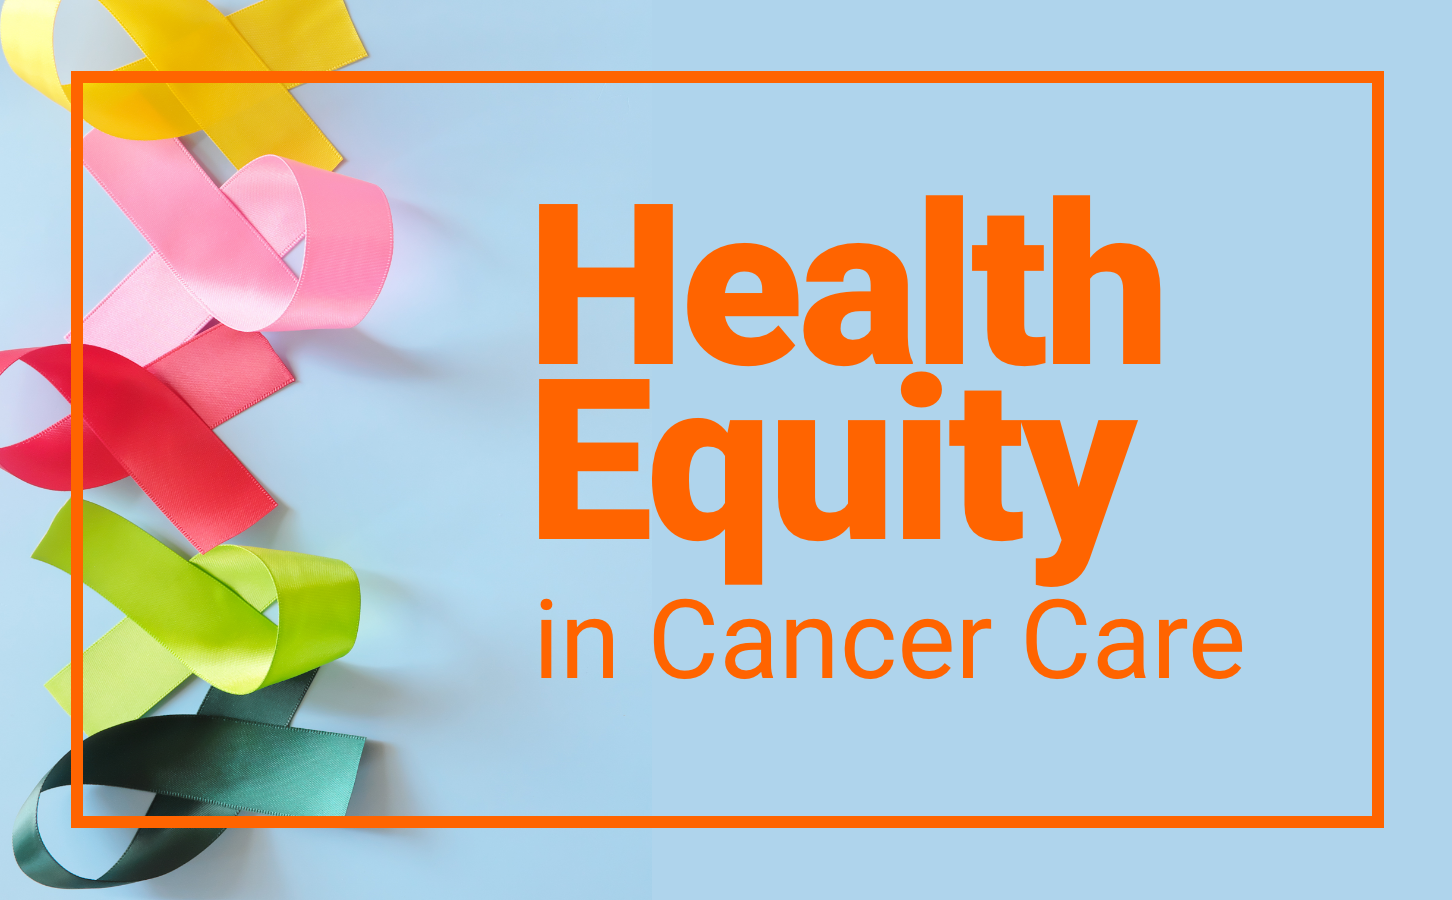 Health Equity in Cancer Care